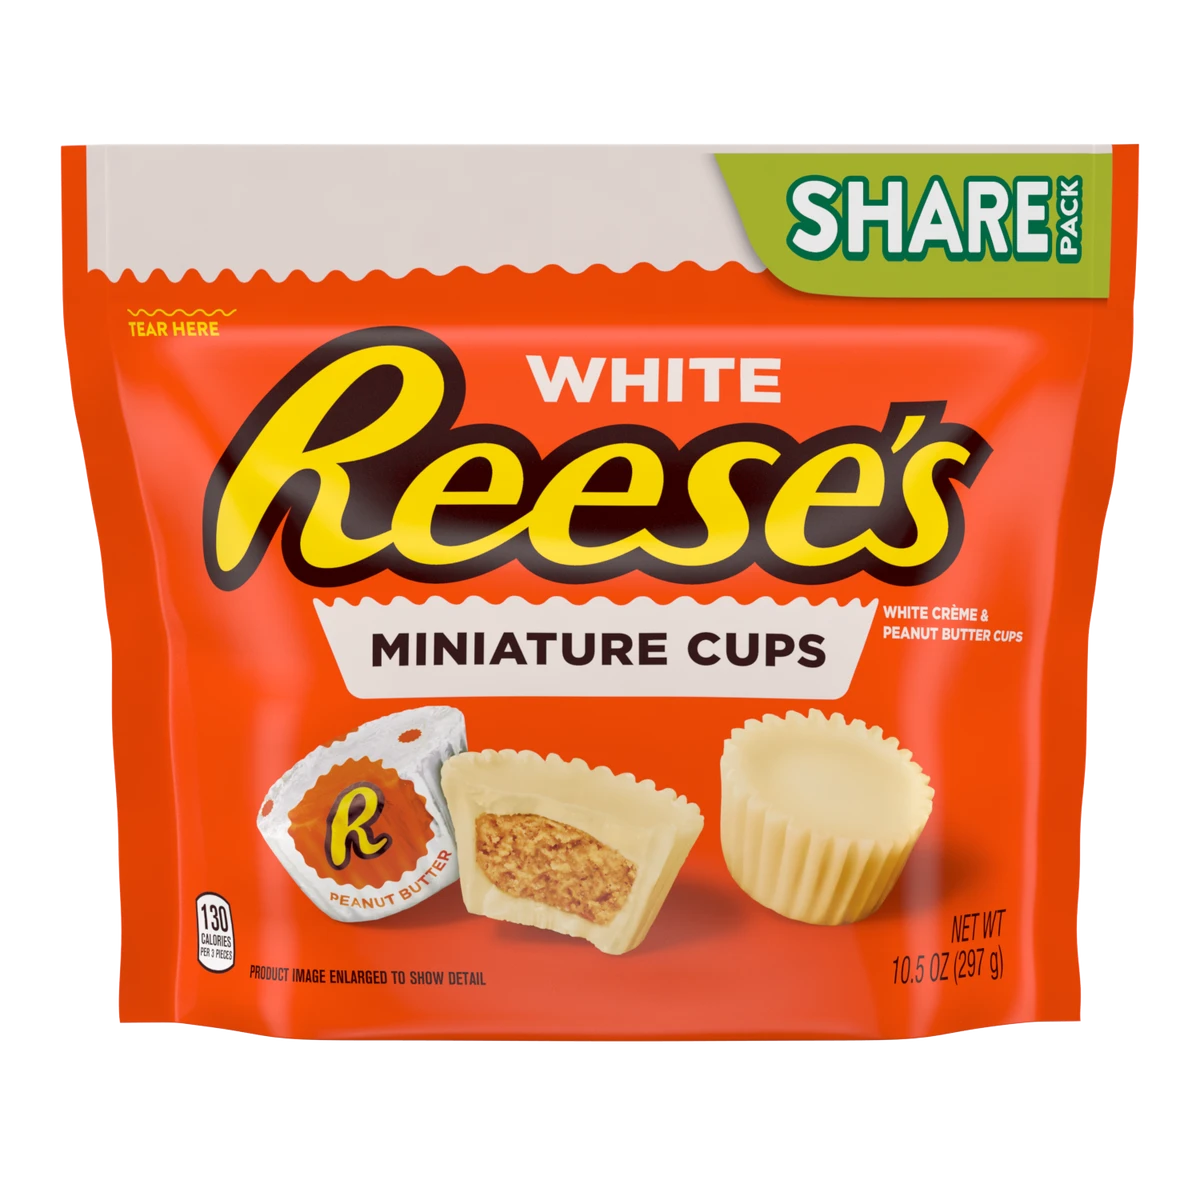 Reese's Peanut Butter Enrobed in White Creme Miniature Cups, Peanut Butter Enrobed in White Creme